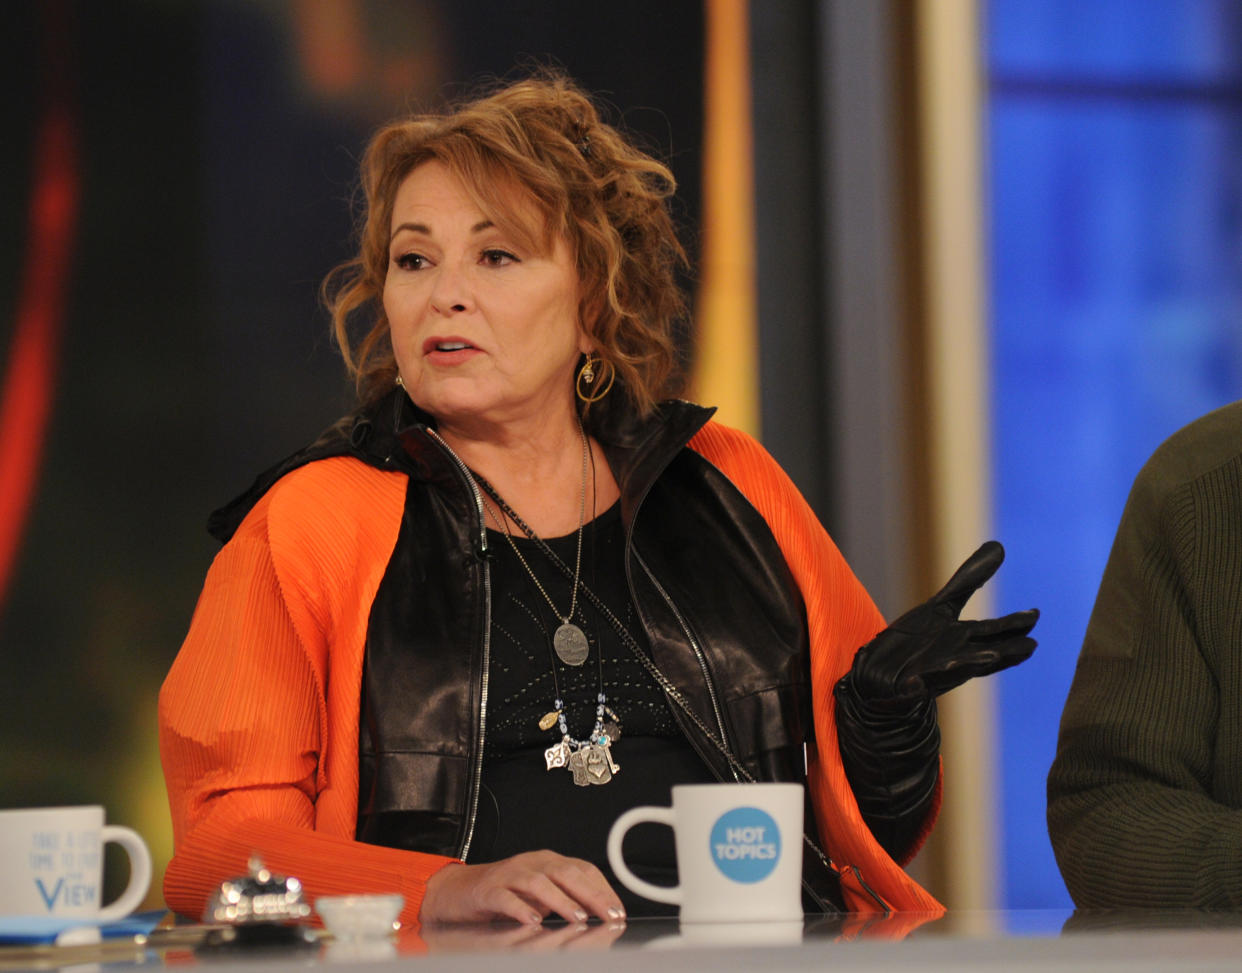 Roseanne Barr was fired after tweeting a racist remark about Valerie Jarrett in May. (Photo: Paula Lobo/ABC via Getty Images)